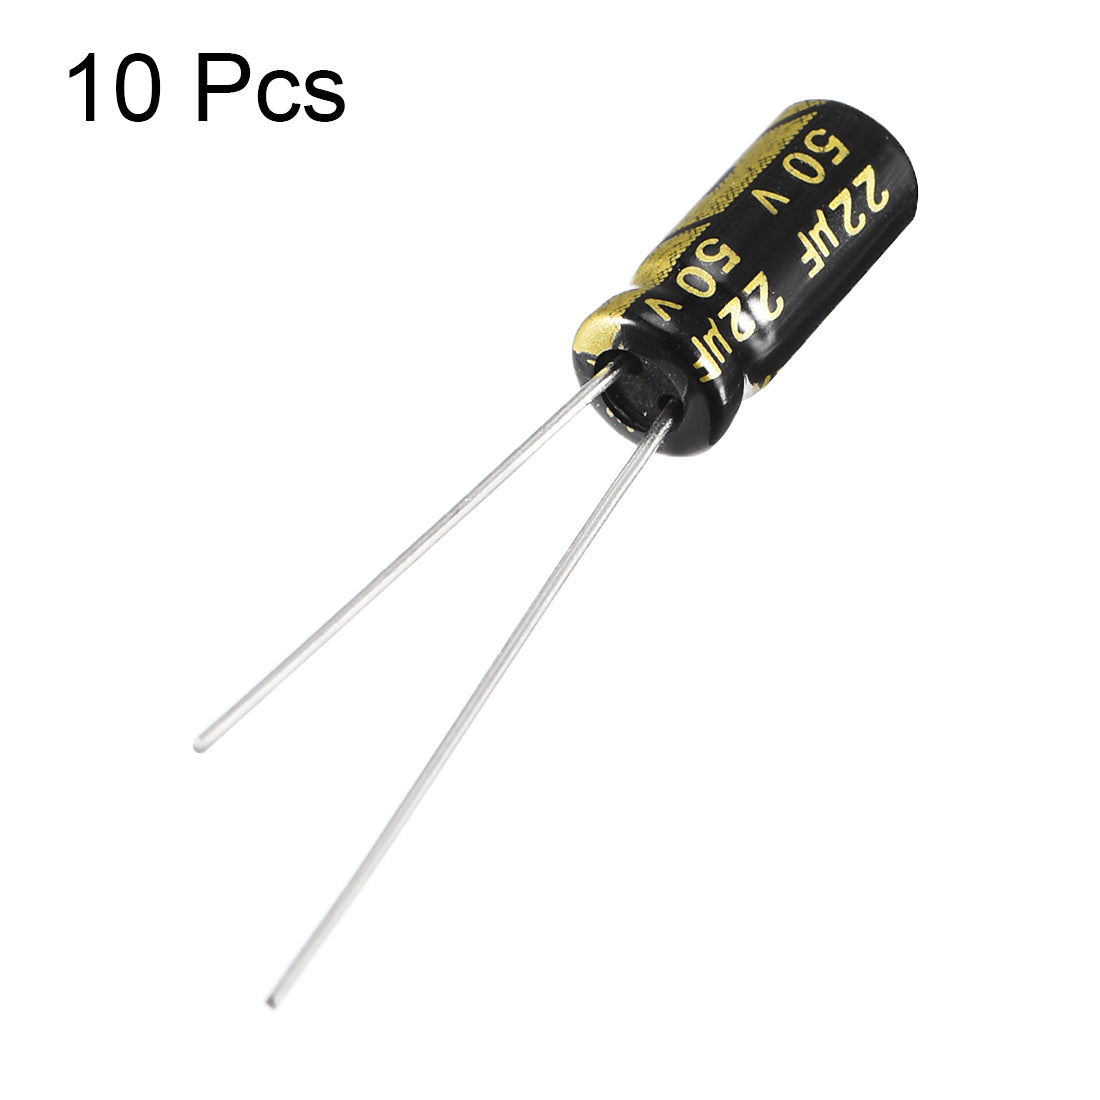 uxcell Uxcell Aluminum Radial Electrolytic Capacitor with 22uF 50V 105 Celsius Life 2000H 5 x 11 mm Black 10pcs